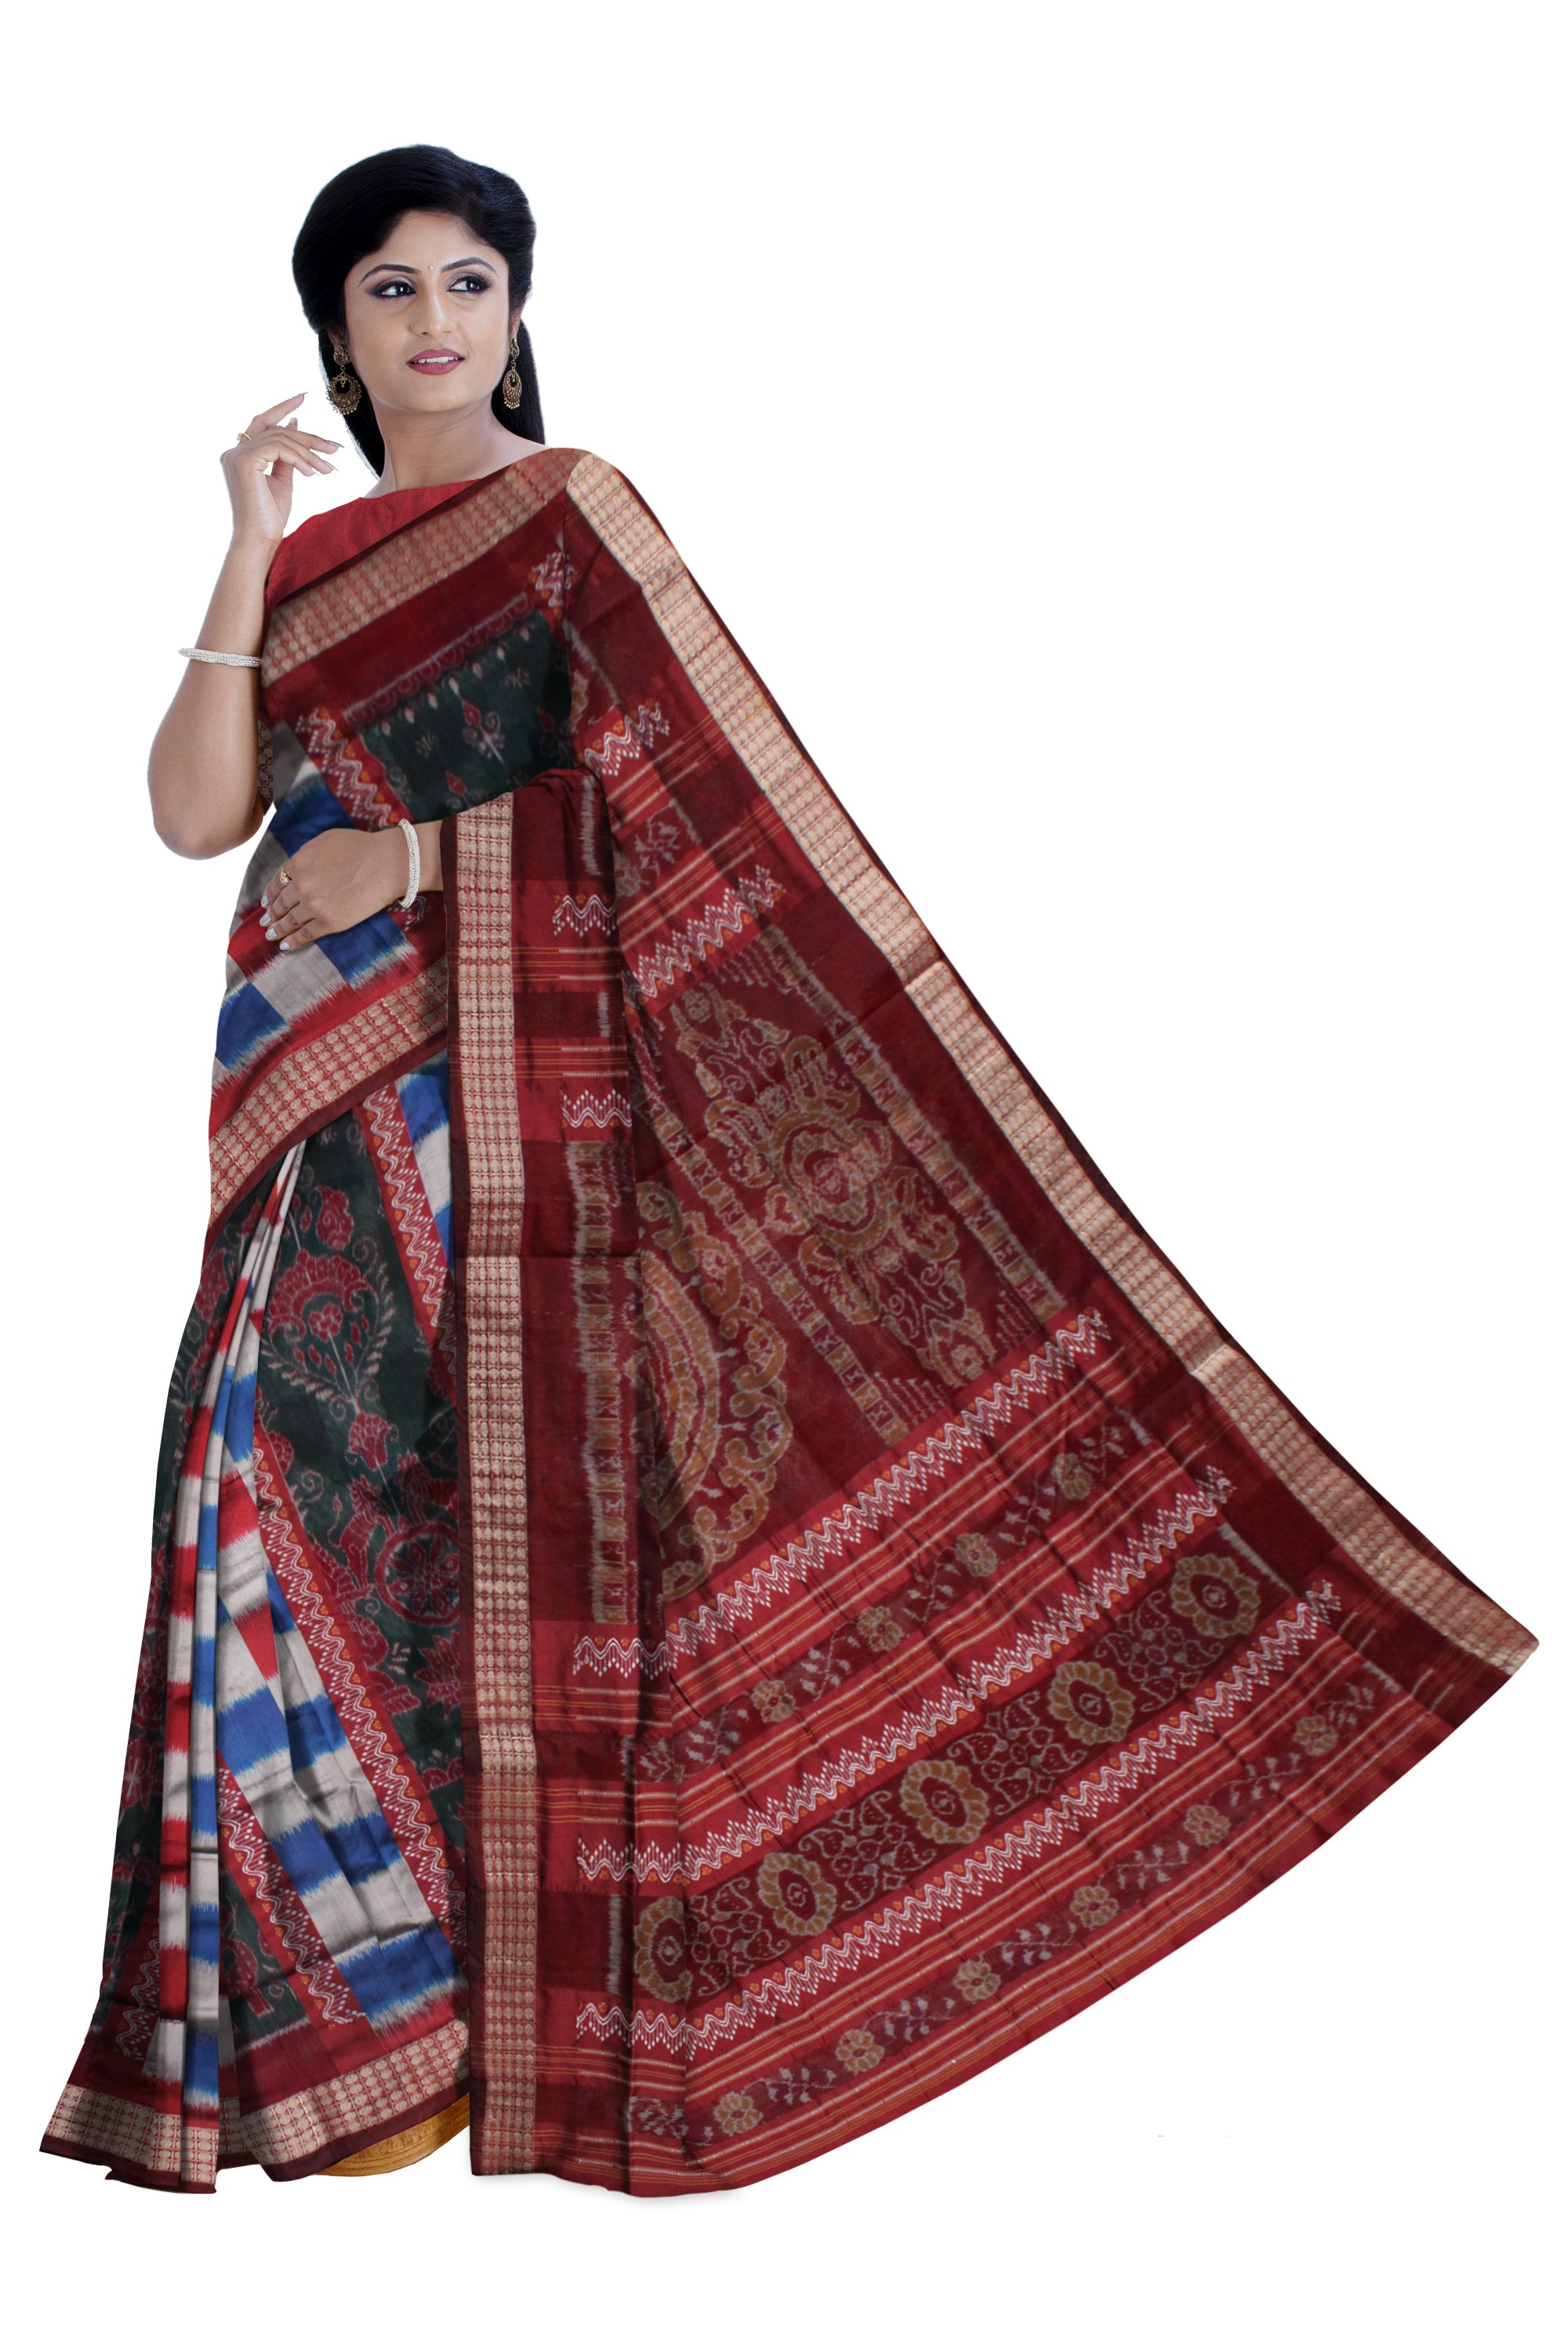 PASAPALI WITH BANDHA PATTERN BOMKEI PATA SAREE IS SKY BLUE AND MAROON COLOR BASE,WITH BLOUSE PIECE. - Koshali Arts & Crafts Enterprise